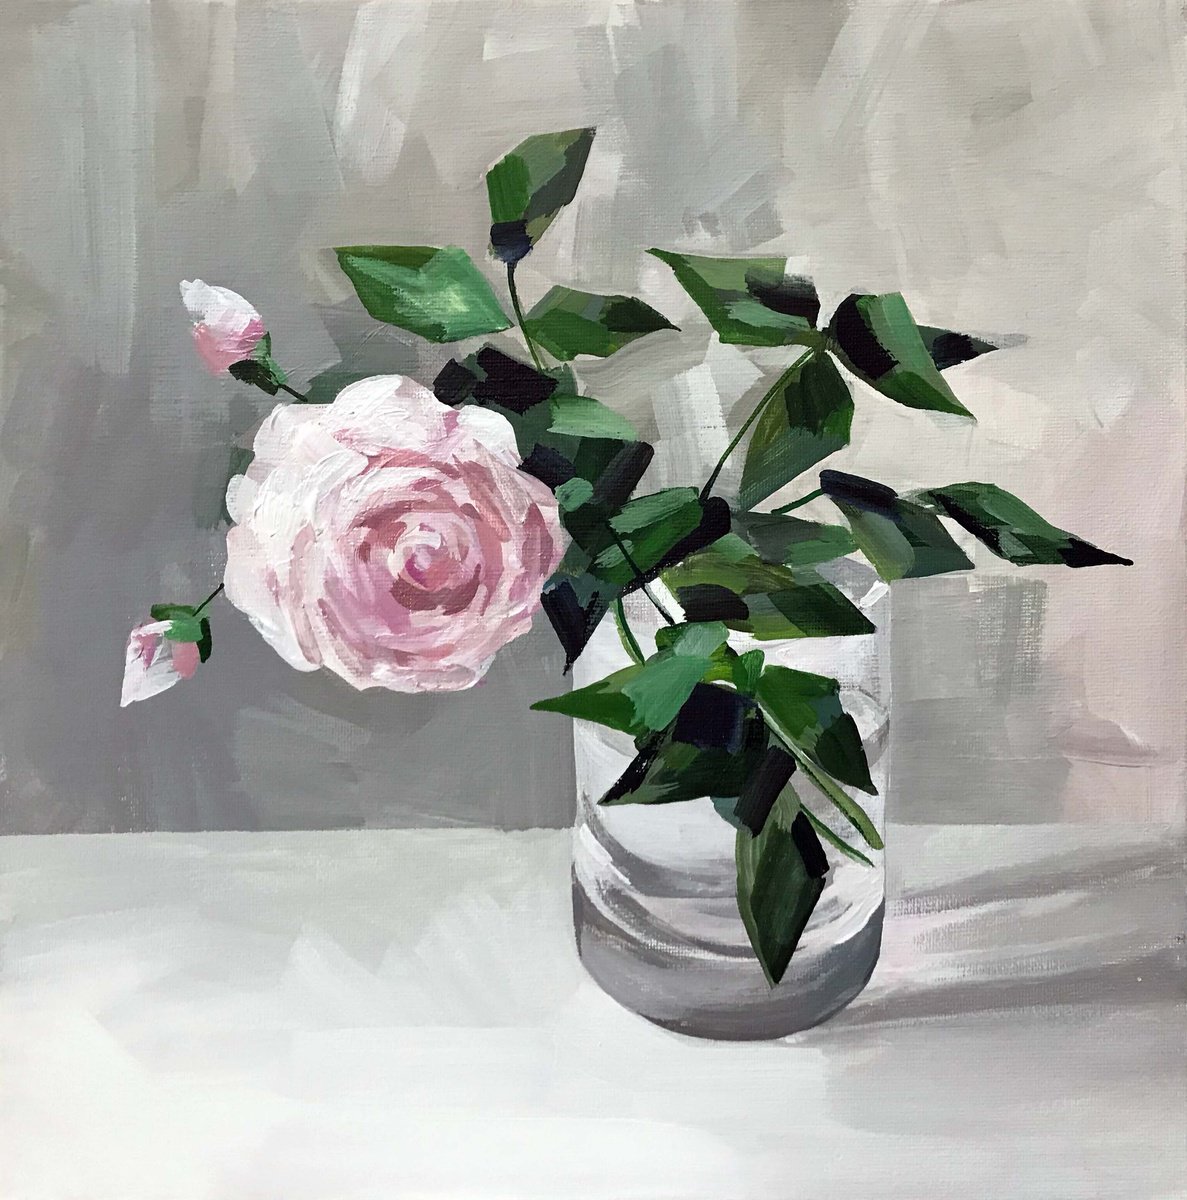 Lonely pink rose. one of a kind, handmade artwork, original painting. by Galina Poloz